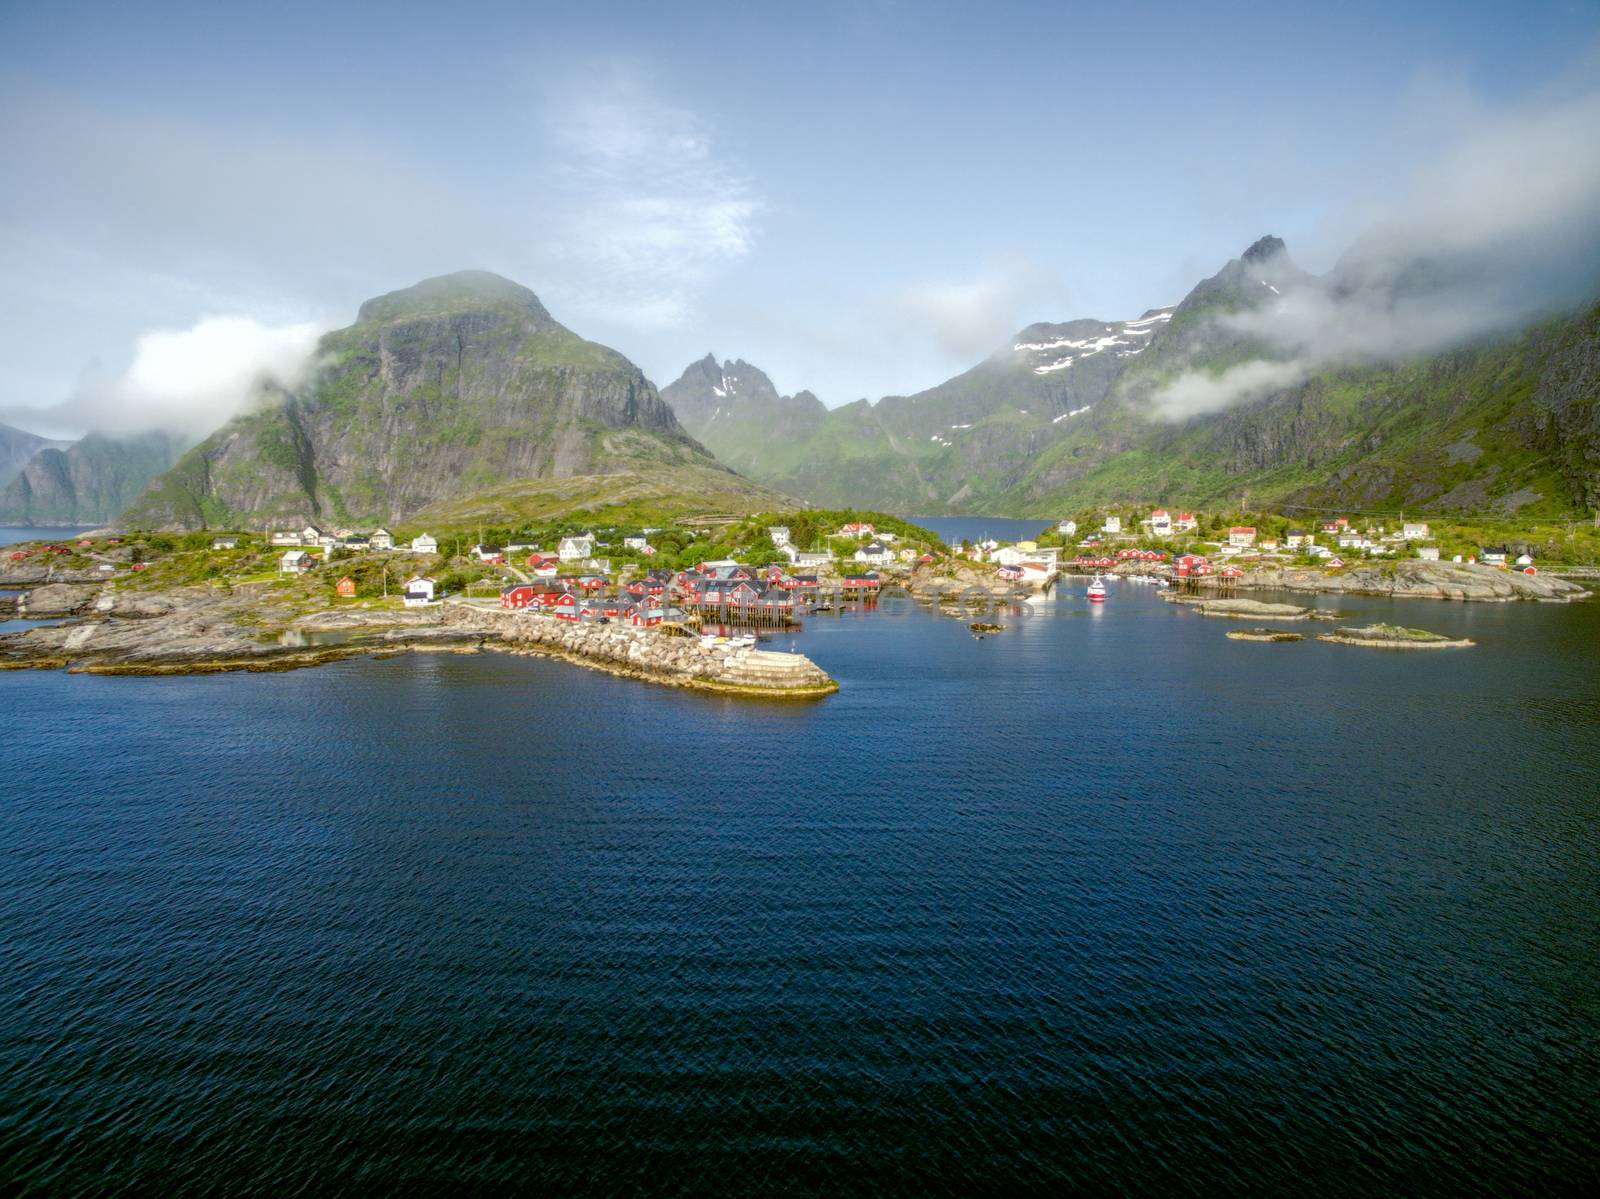 Aerial view of scenic fishing village A on Lofoten islands in Norway with traditional red fishing huts